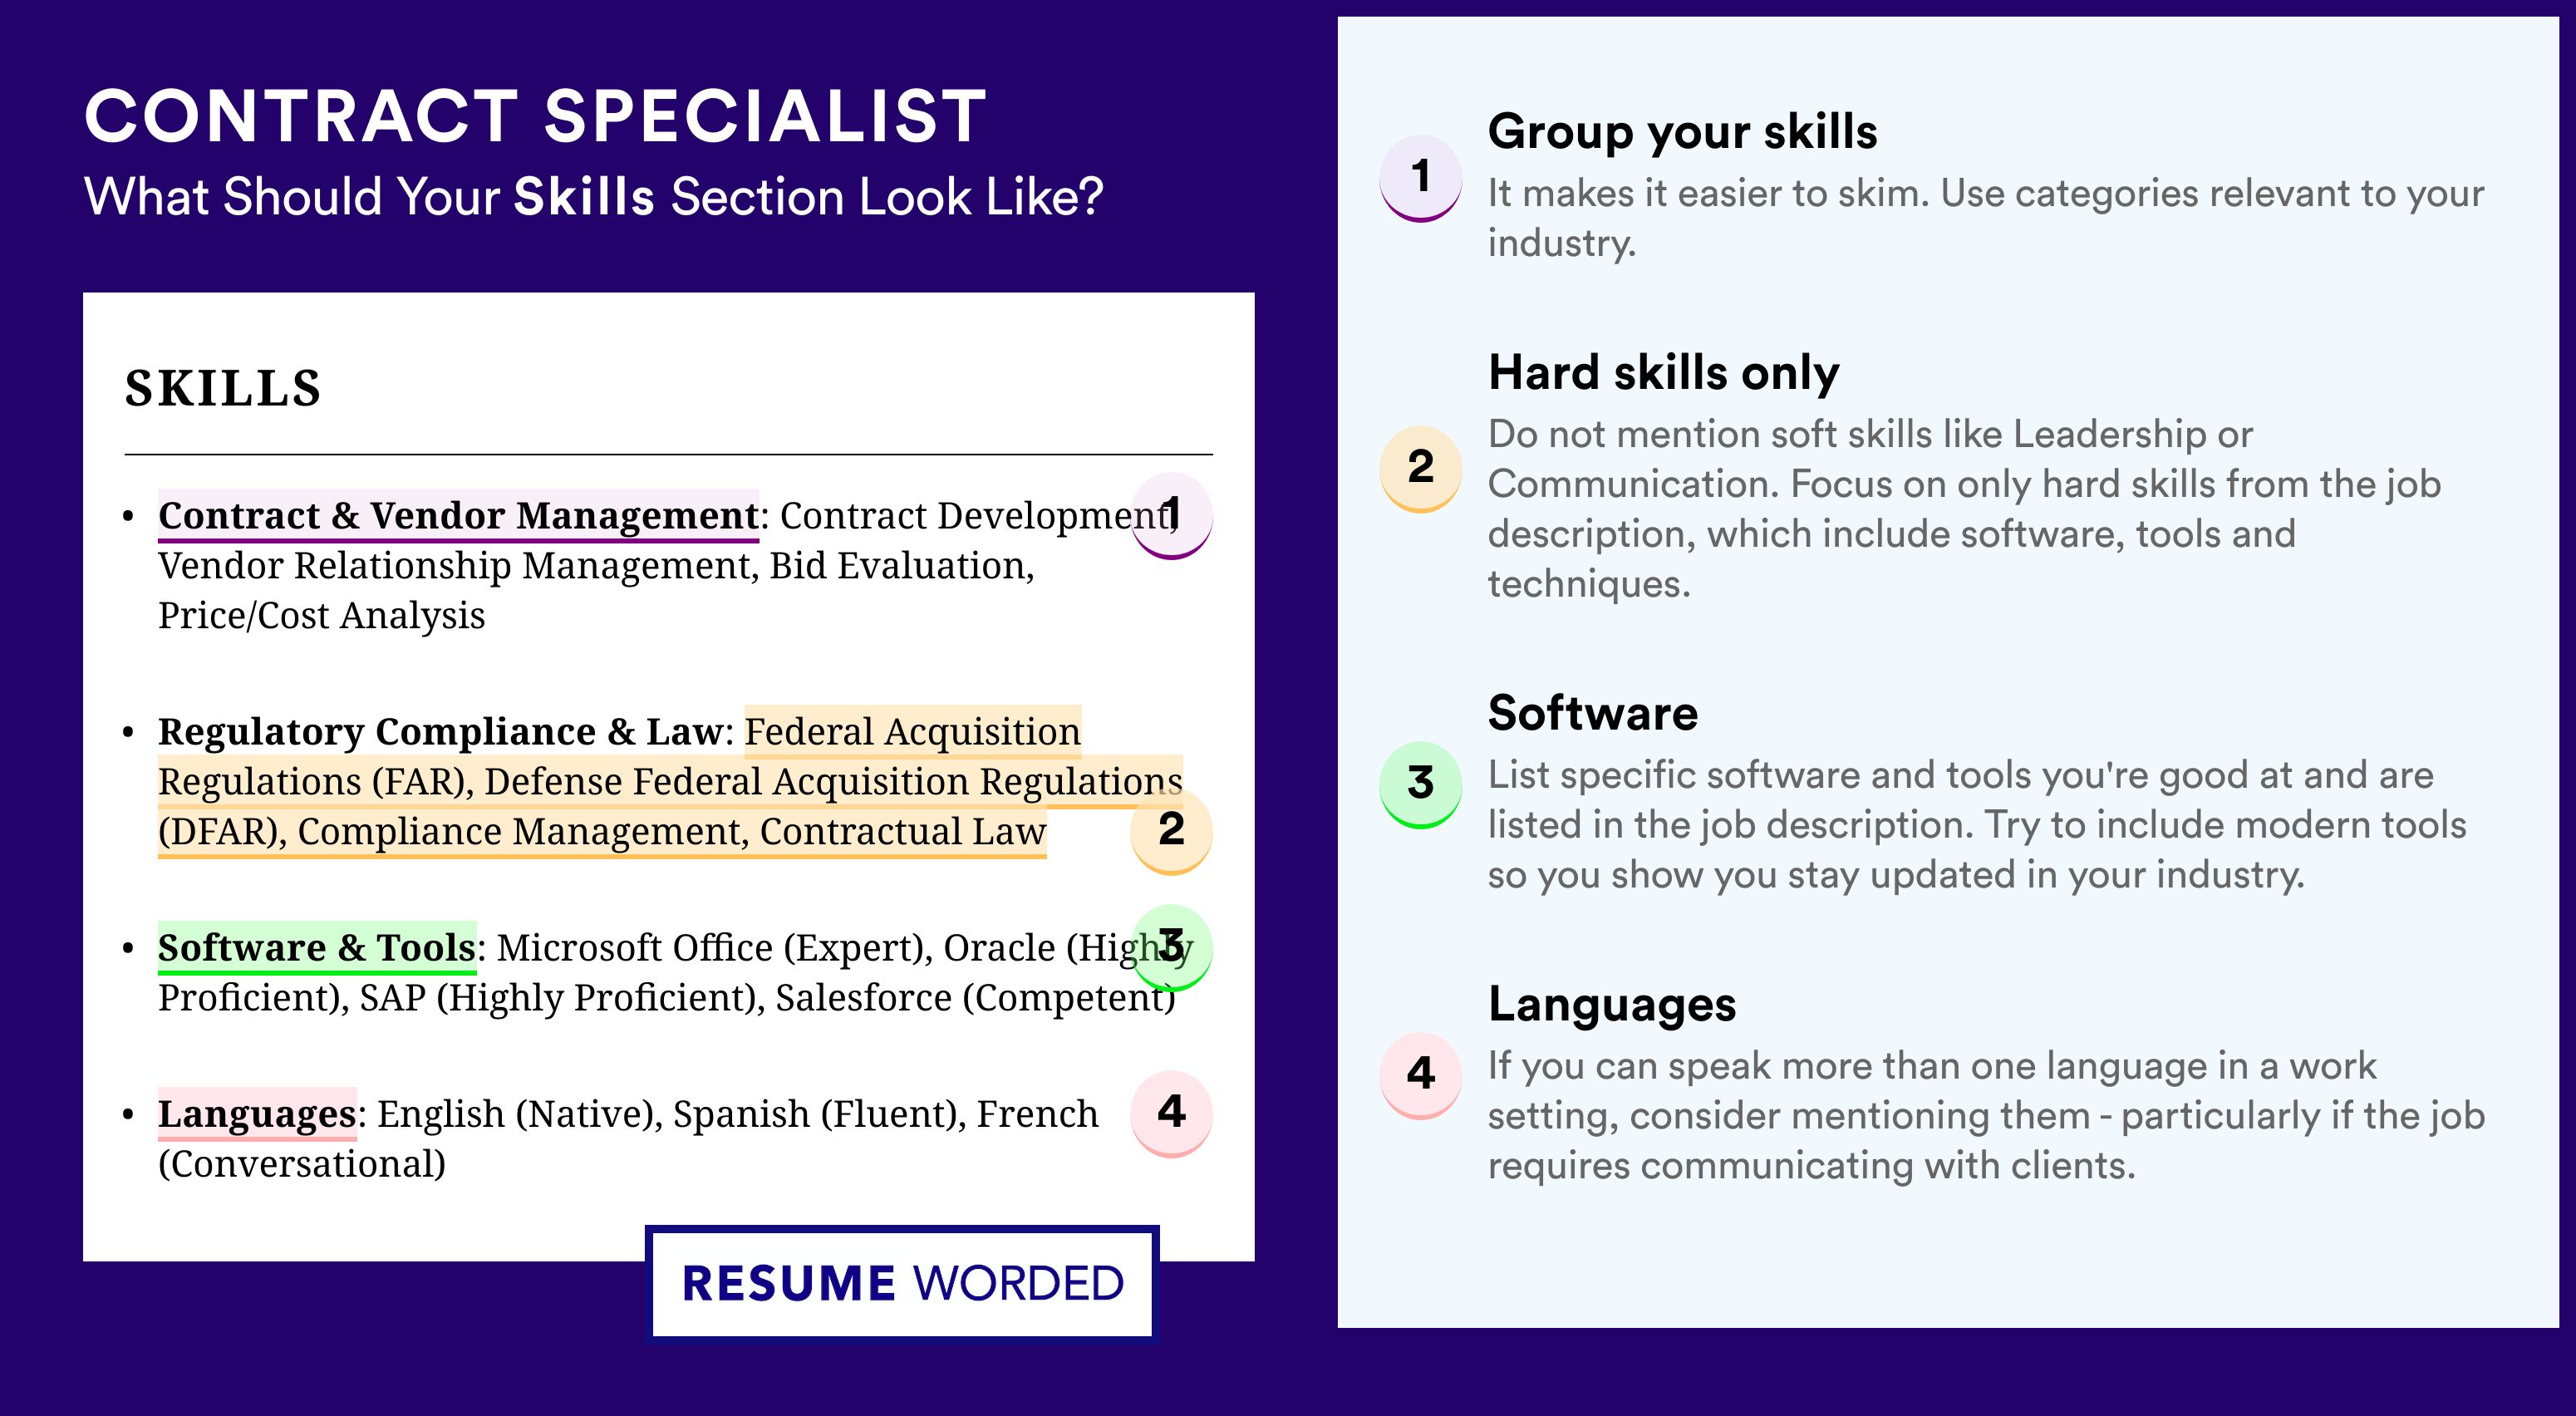 How To Write Your Skills Section - Contract Specialist Roles